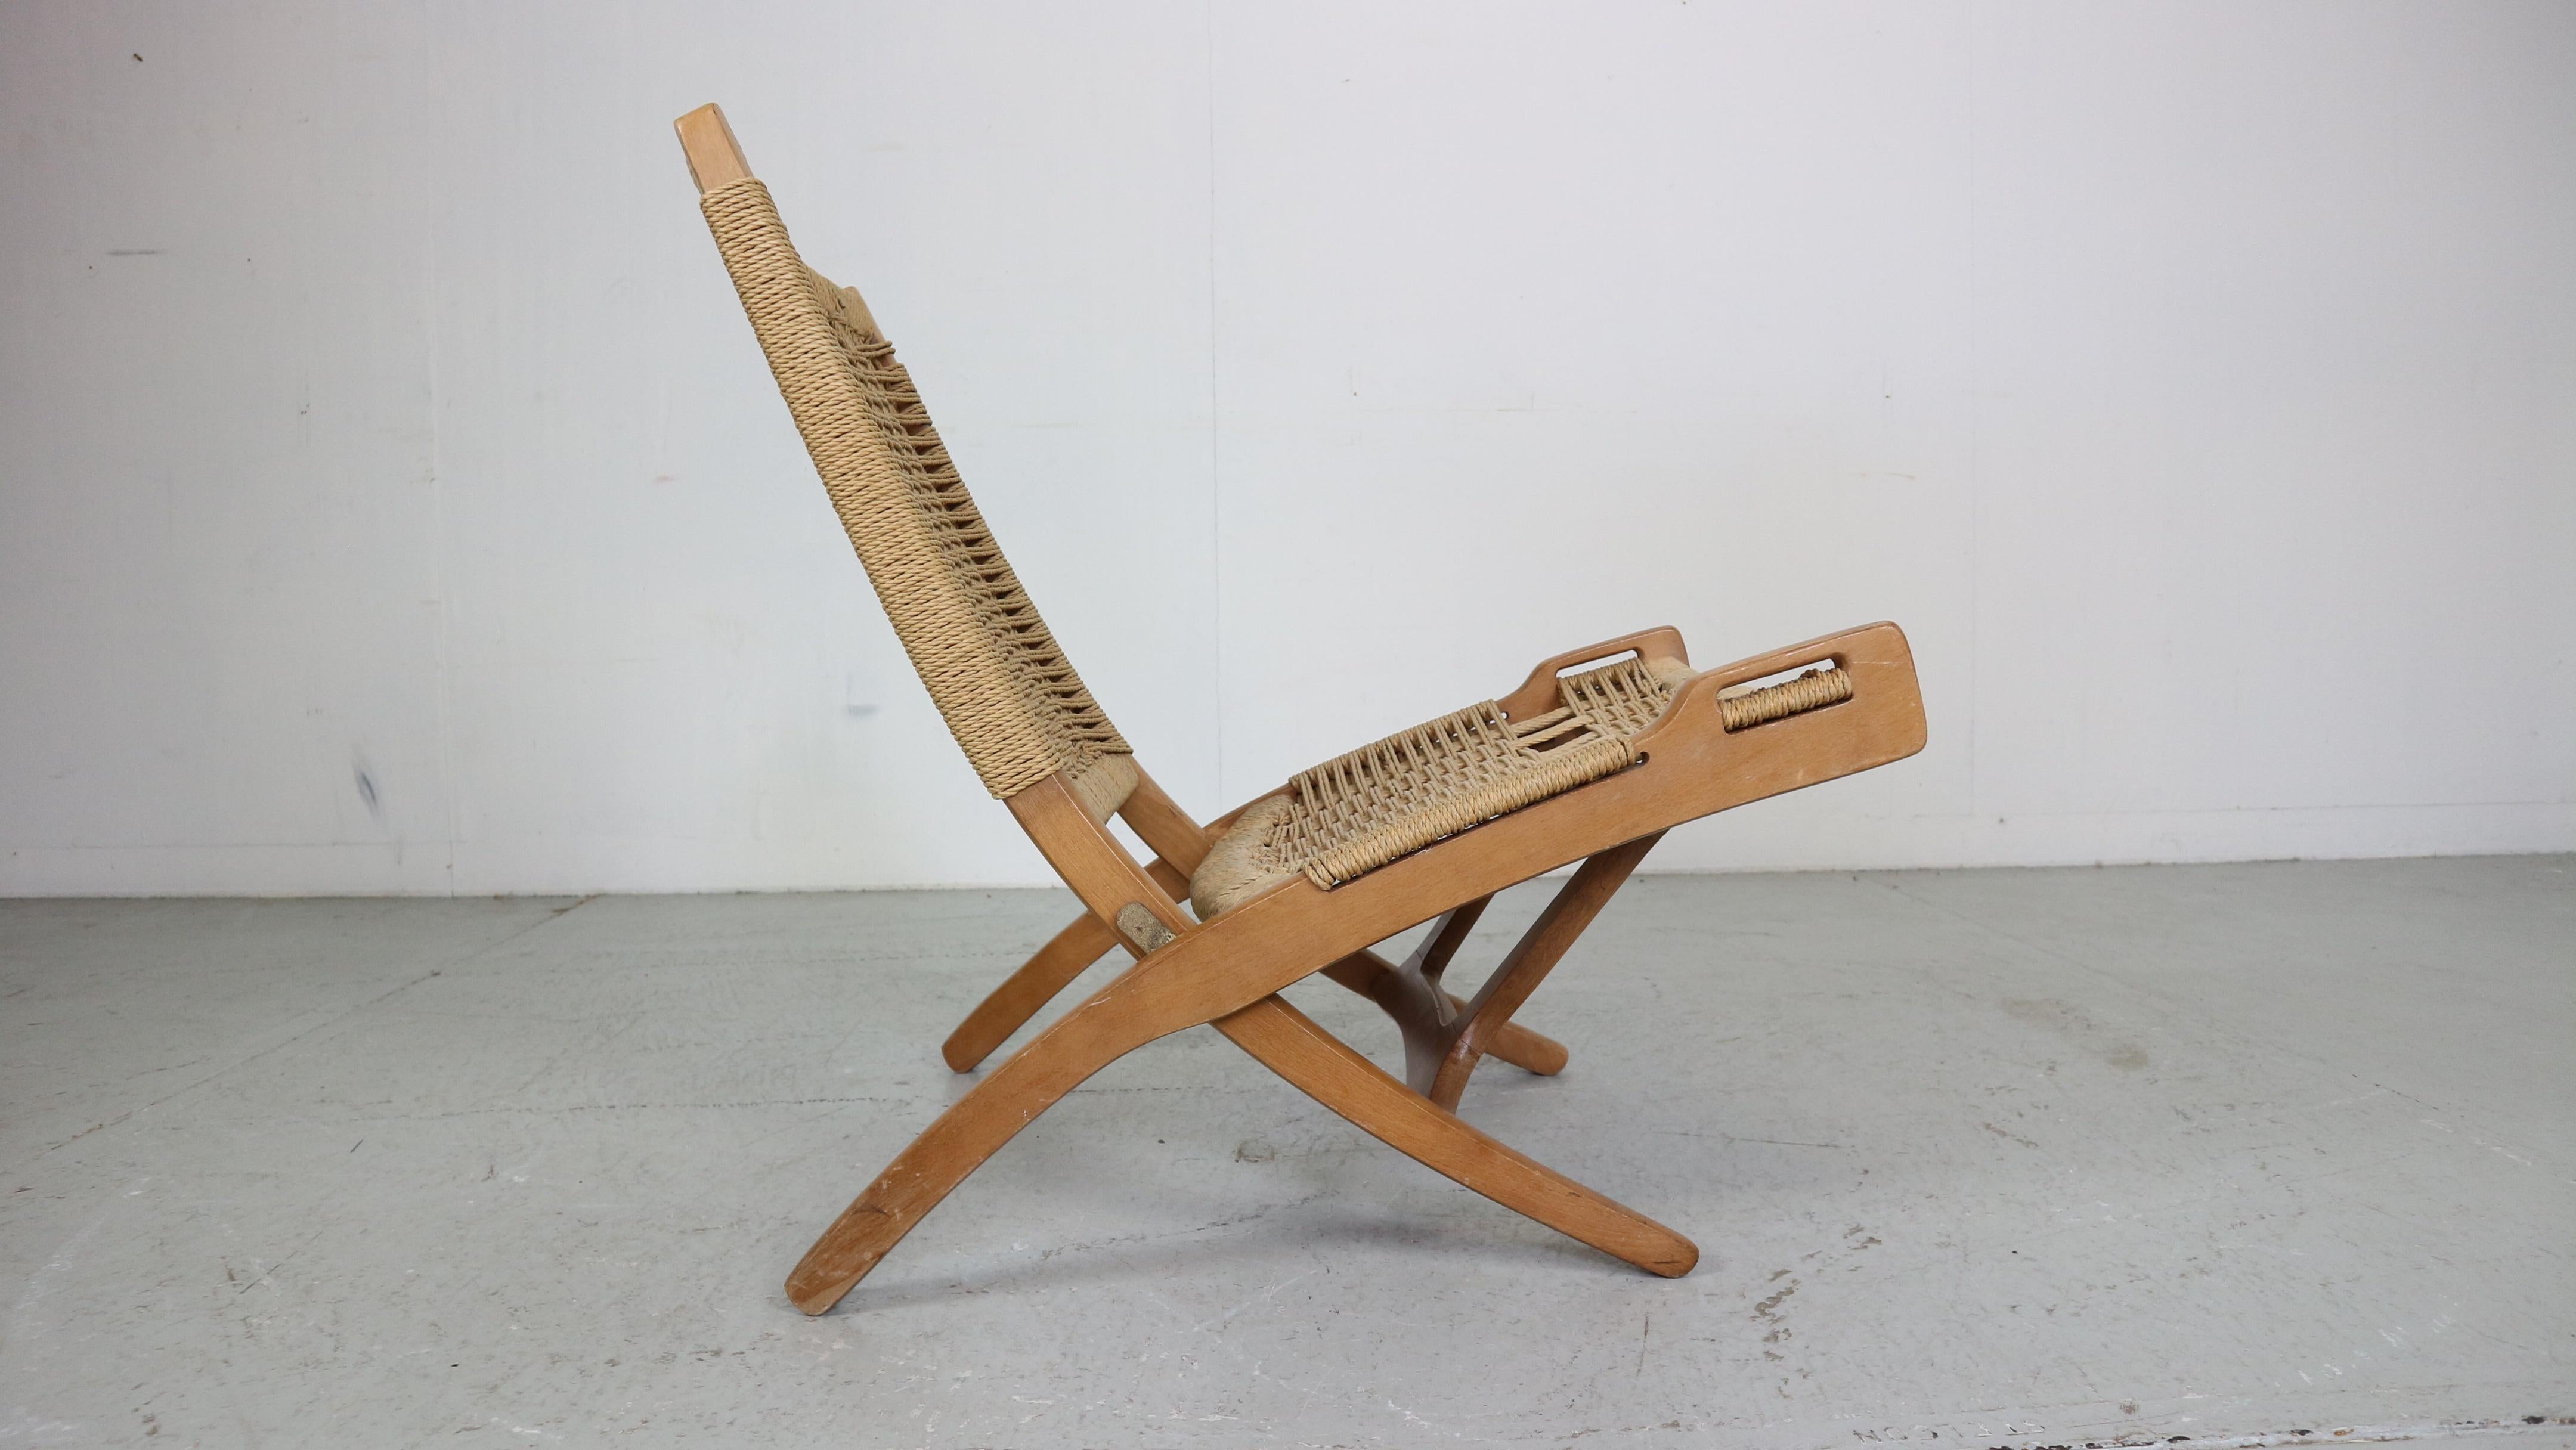 Mid-Century Modern Wegner style folding lounge chairs designed by English designer Ebert Wels, in 1960's period United Kingdom.

These super stylish low profile chairs are made of beautiful beech wood and woven cord rope.
 The design is very similar